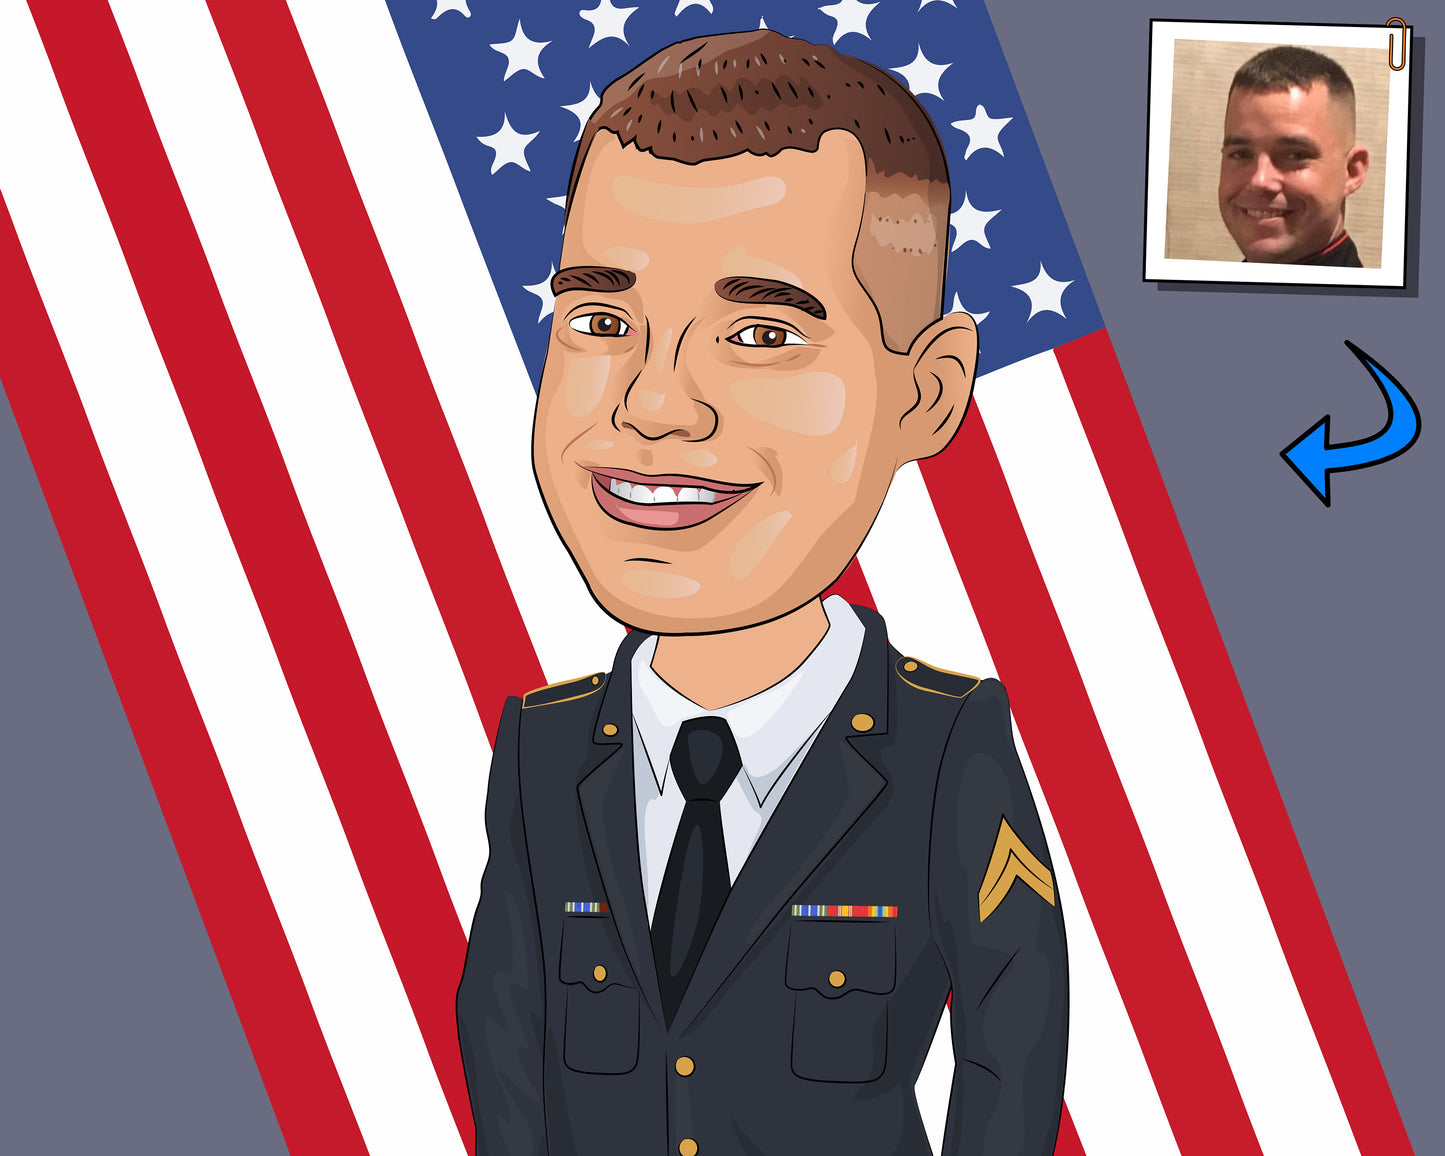 Corporal Gift - Custom Caricature Portrait From Your Photo